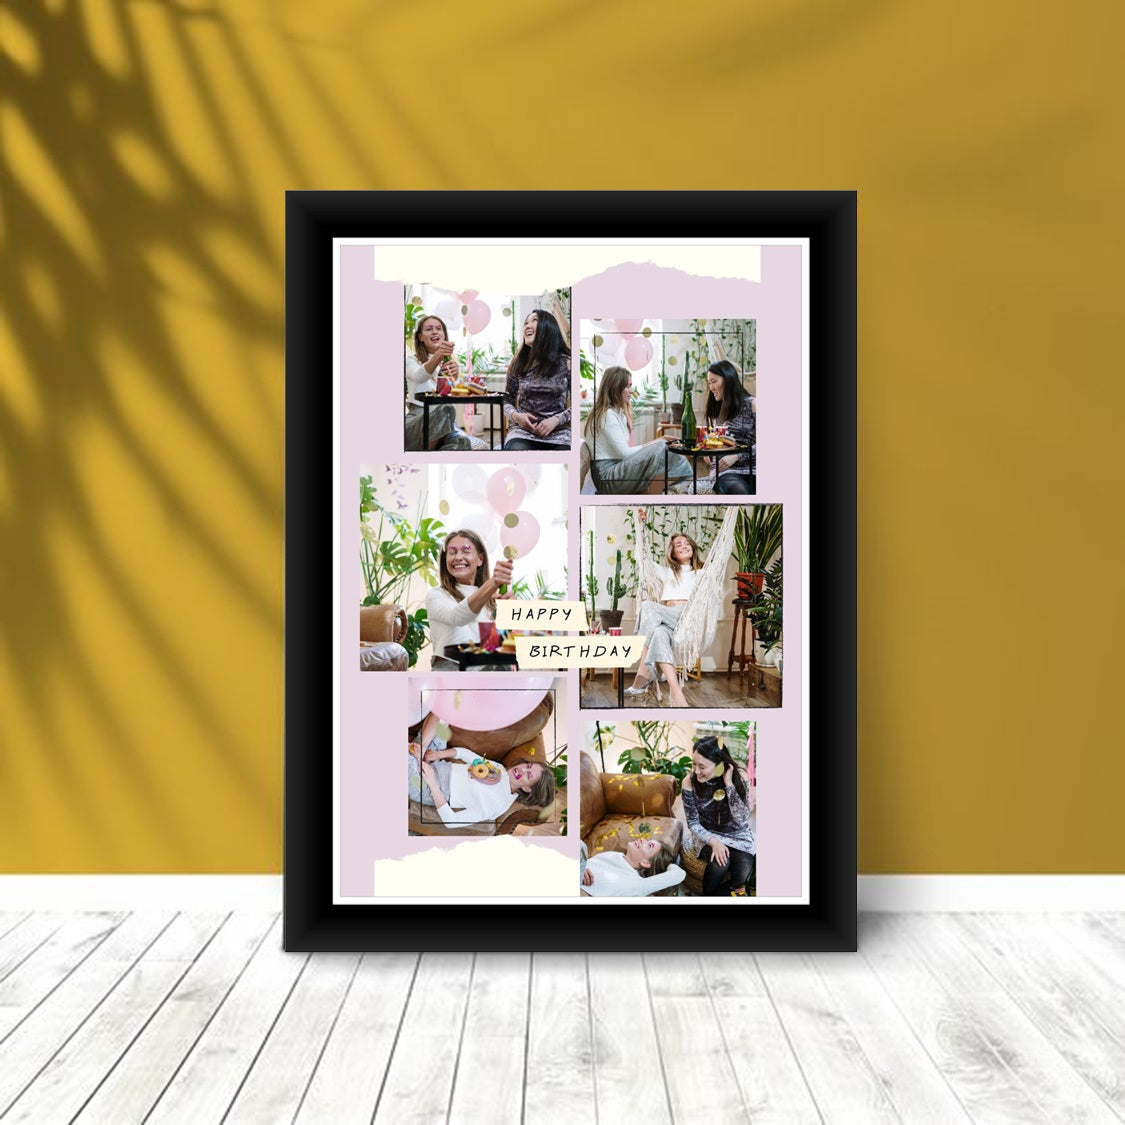 Buy or send Personalised Picture Collage Black Birthday Frame online with Bakers Wagon